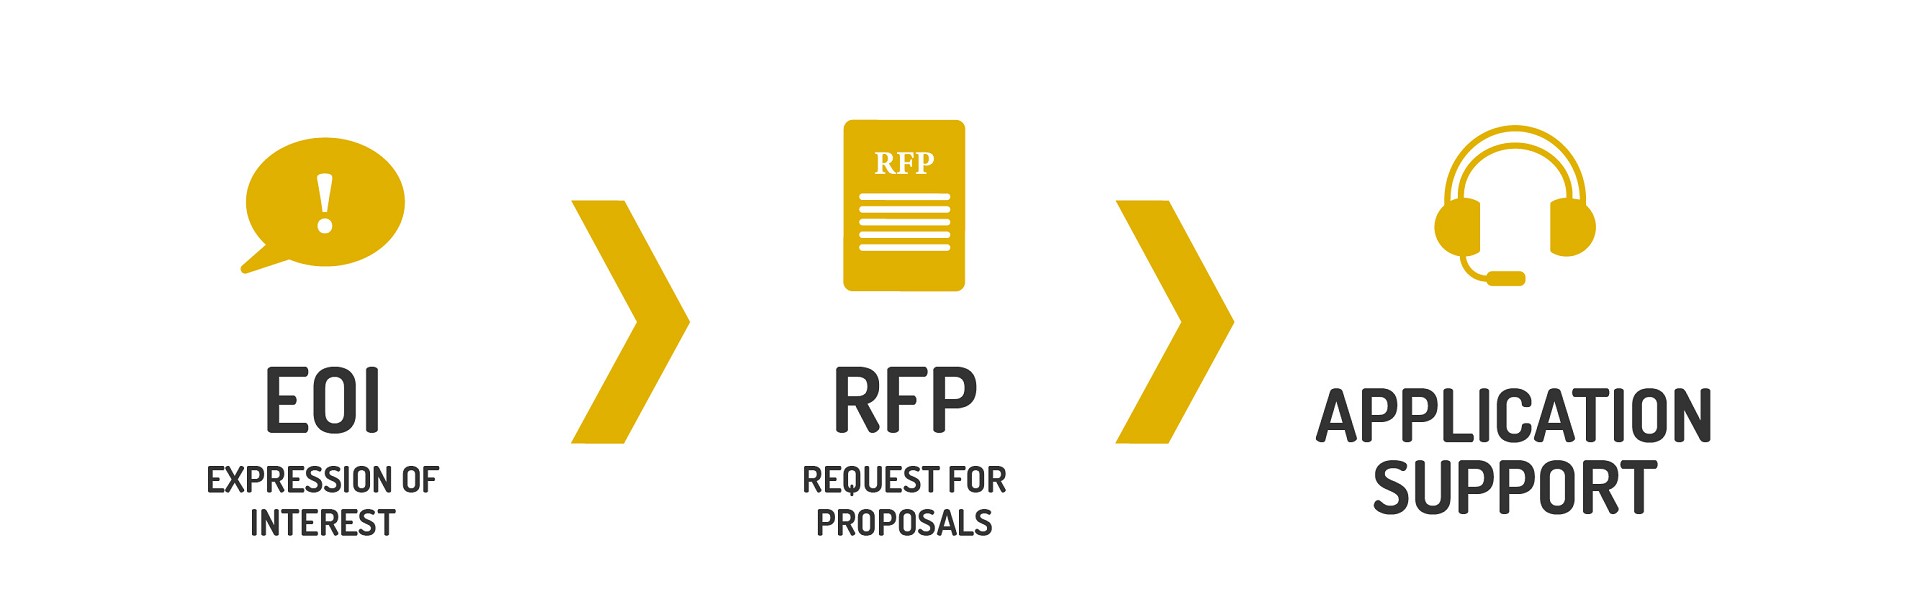 eoi-rfp-appsupport-graphic-01